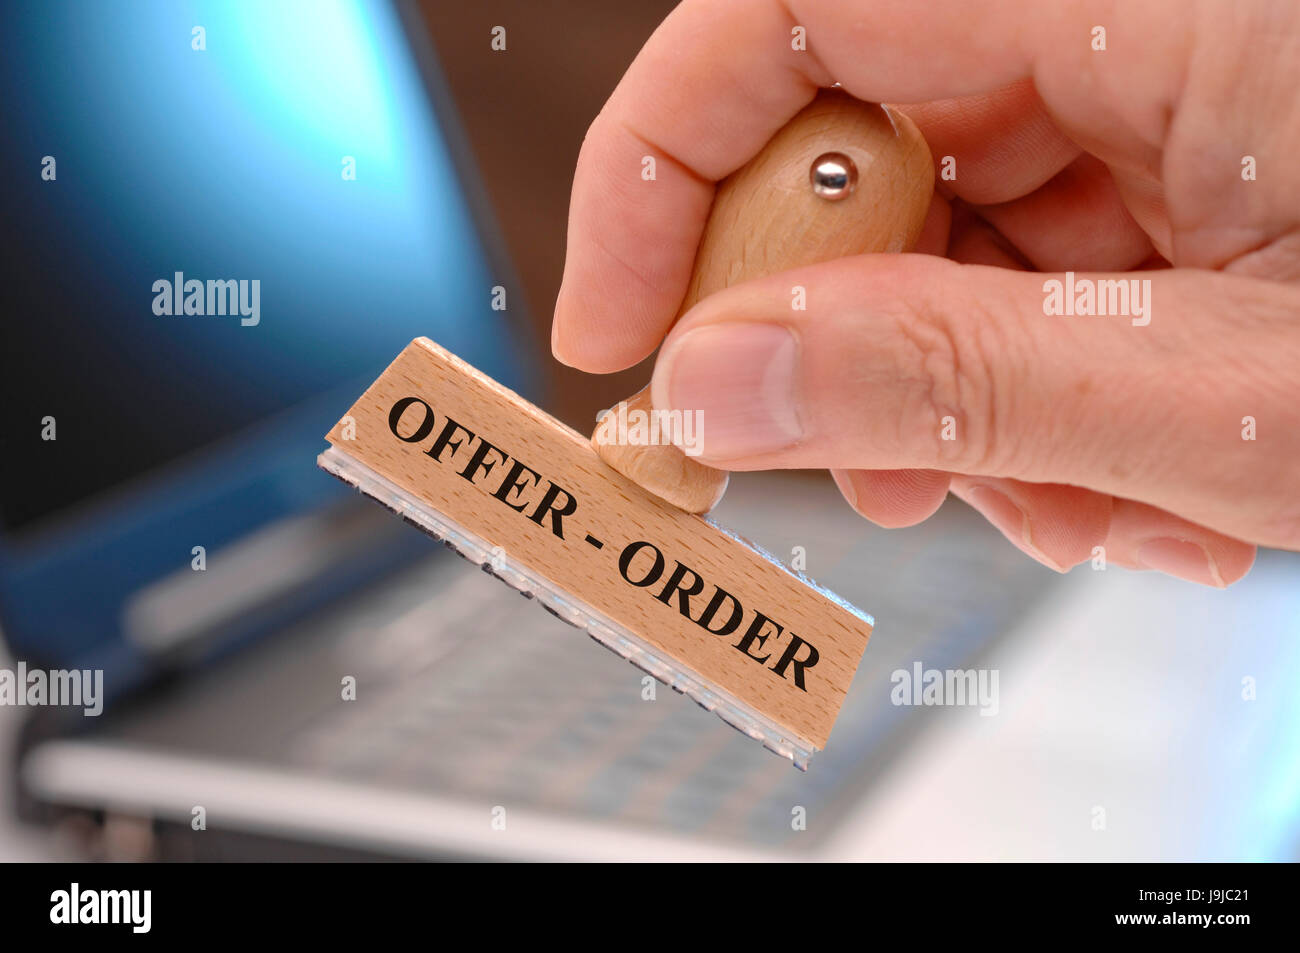 offer and order marked on rubber stamp in hand Stock Photo